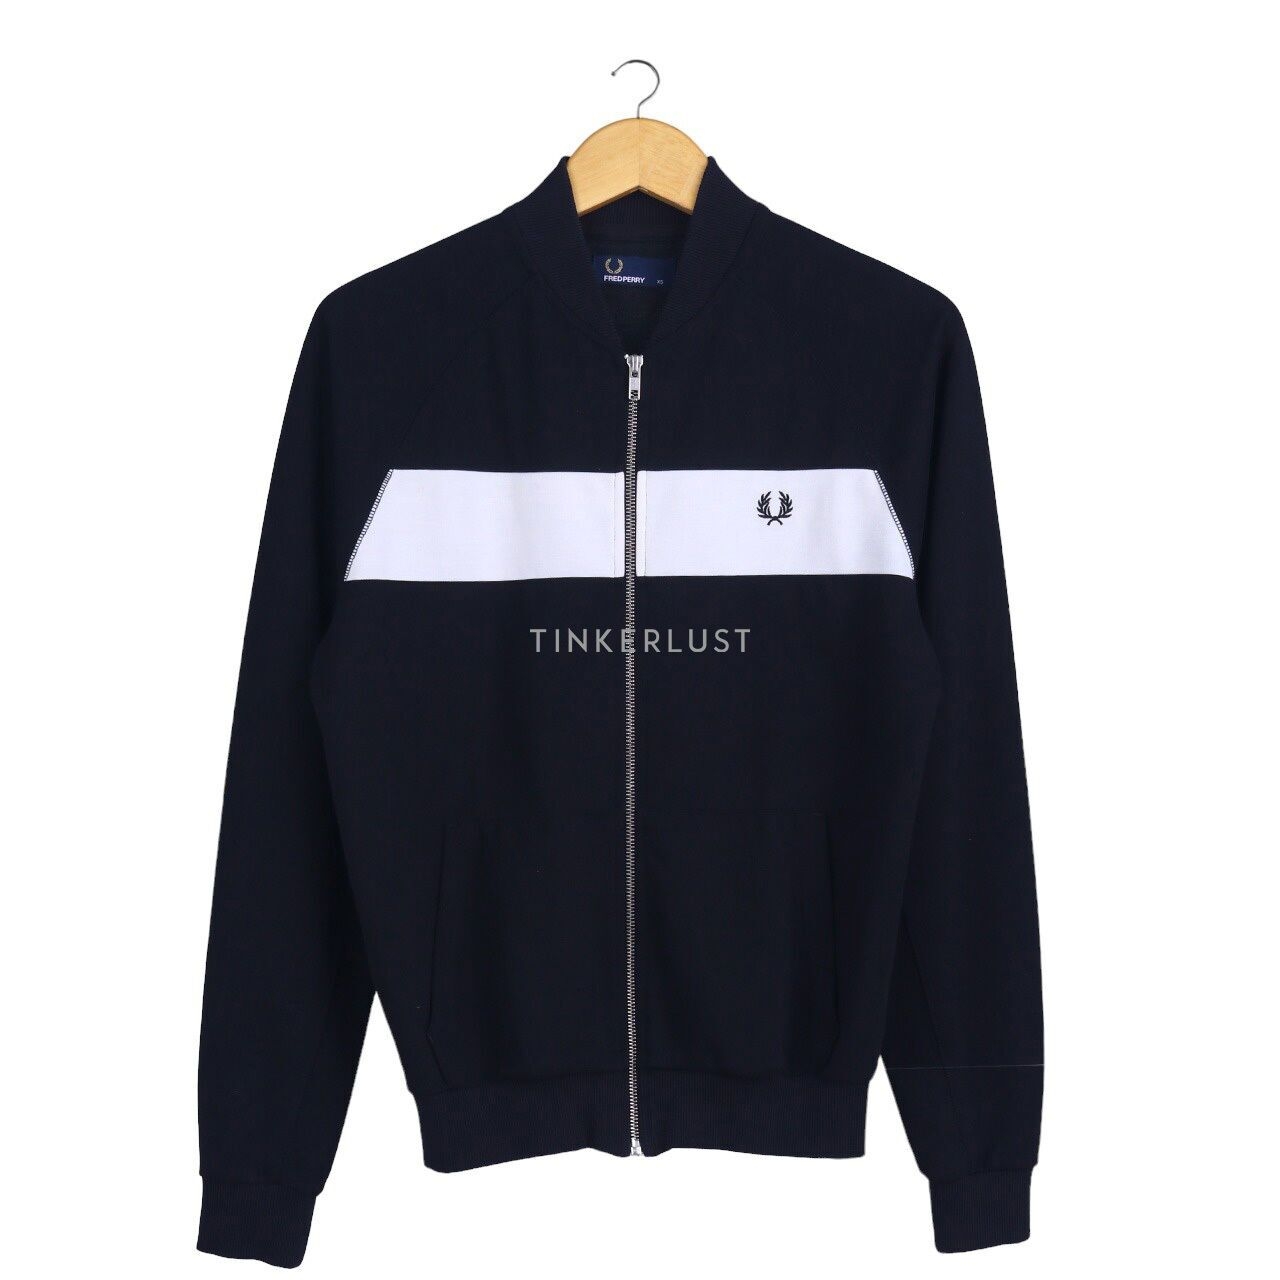 Fred Perry Black Jaket